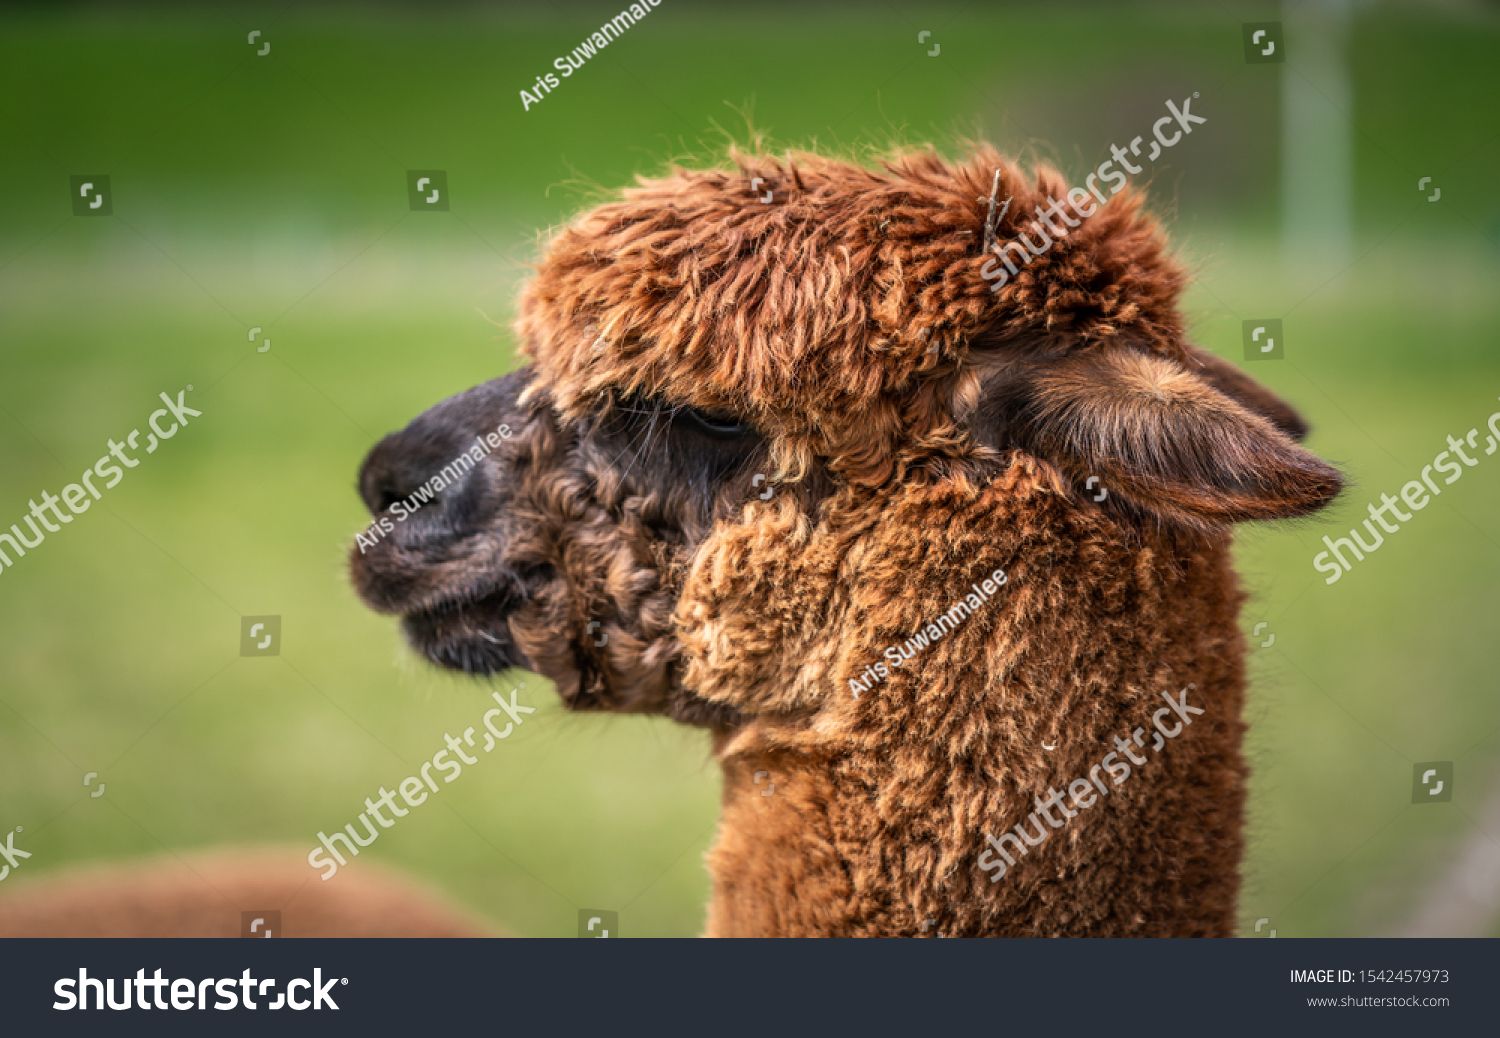 Alpaca With Natural Blurred Background Ad Sponsored